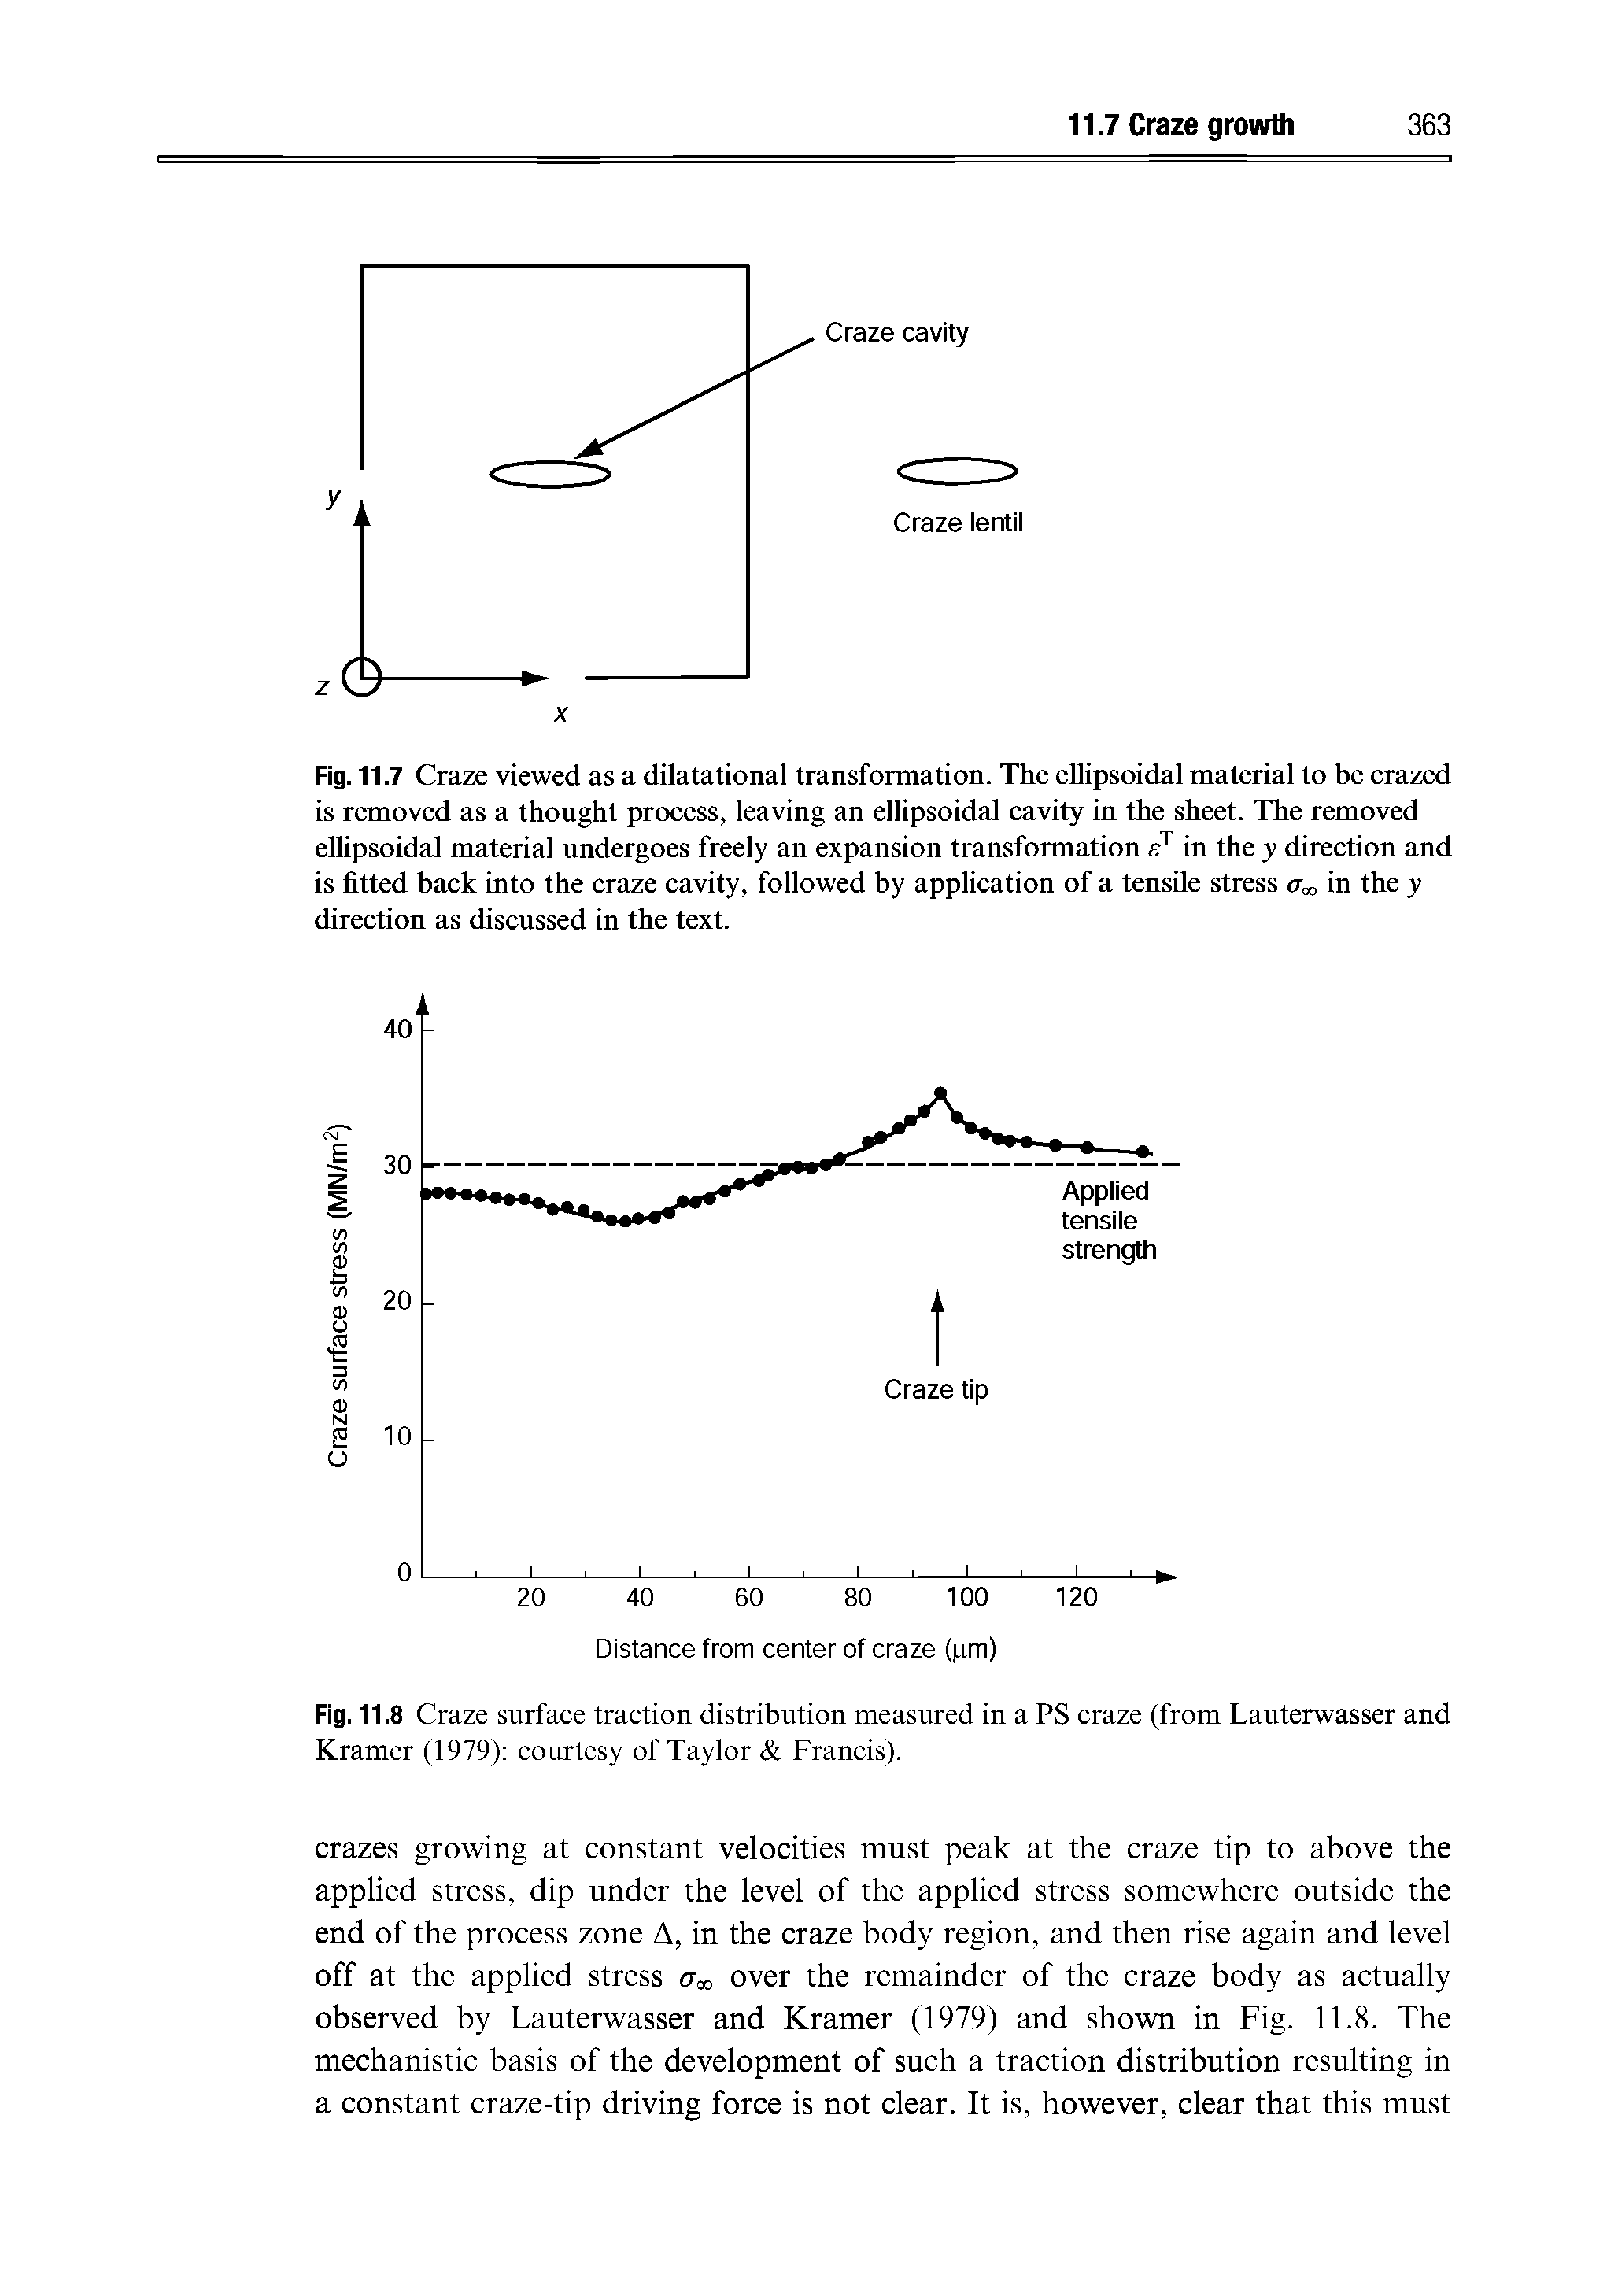 Fig. 11.8 Craze surface traction distribution measured in a PS craze (from Lauterwasser and Kramer (1979) courtesy of Taylor Francis).